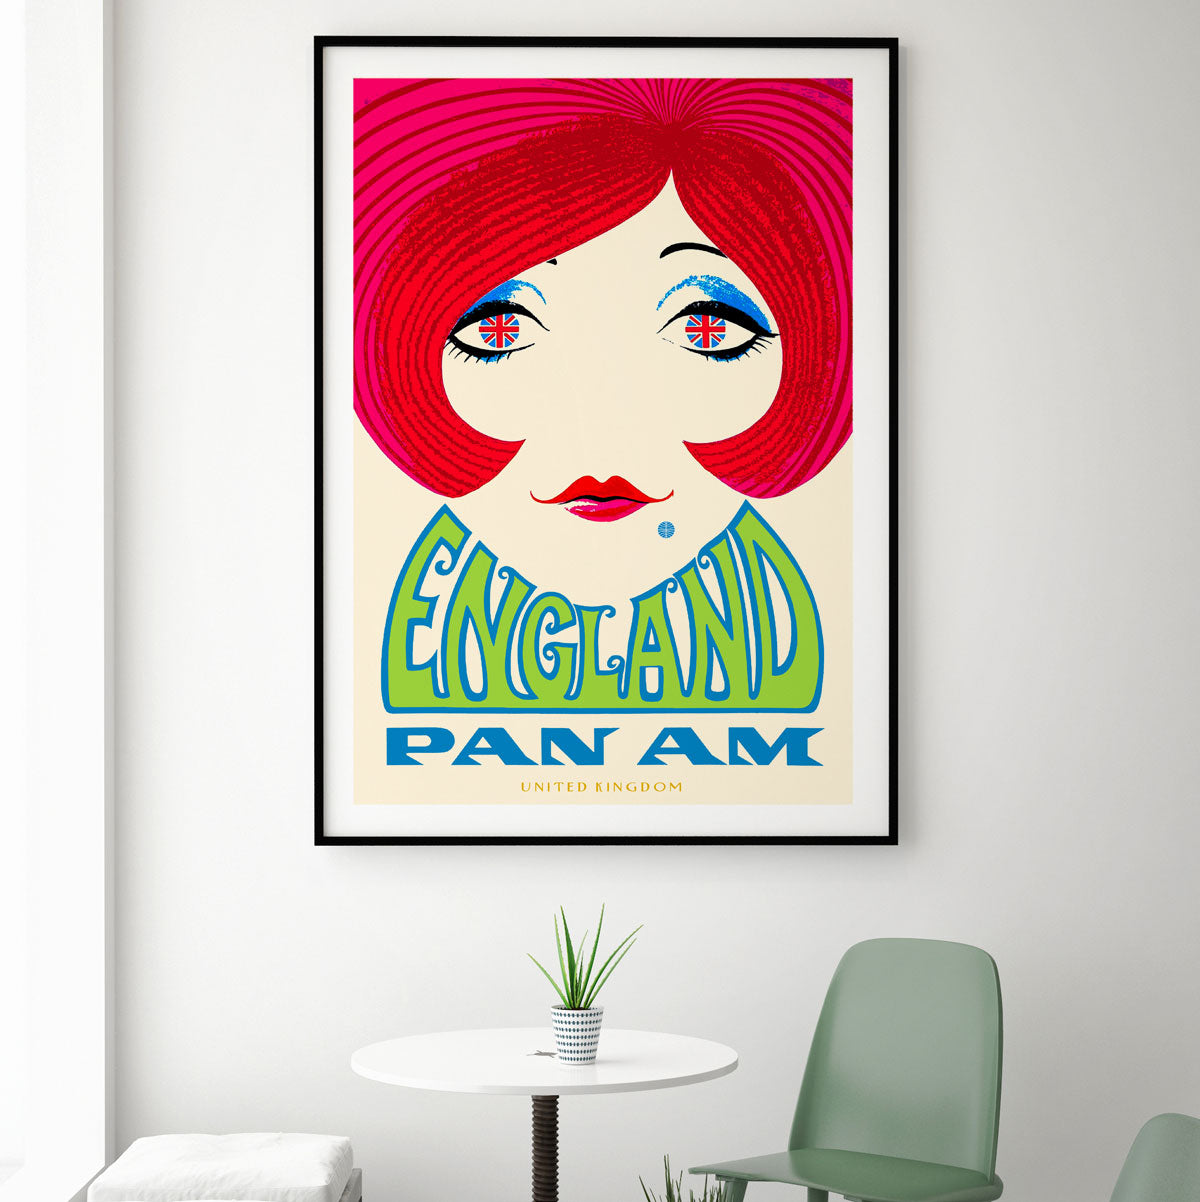 Pan Am England retro vintage travel poster from Places We Luv